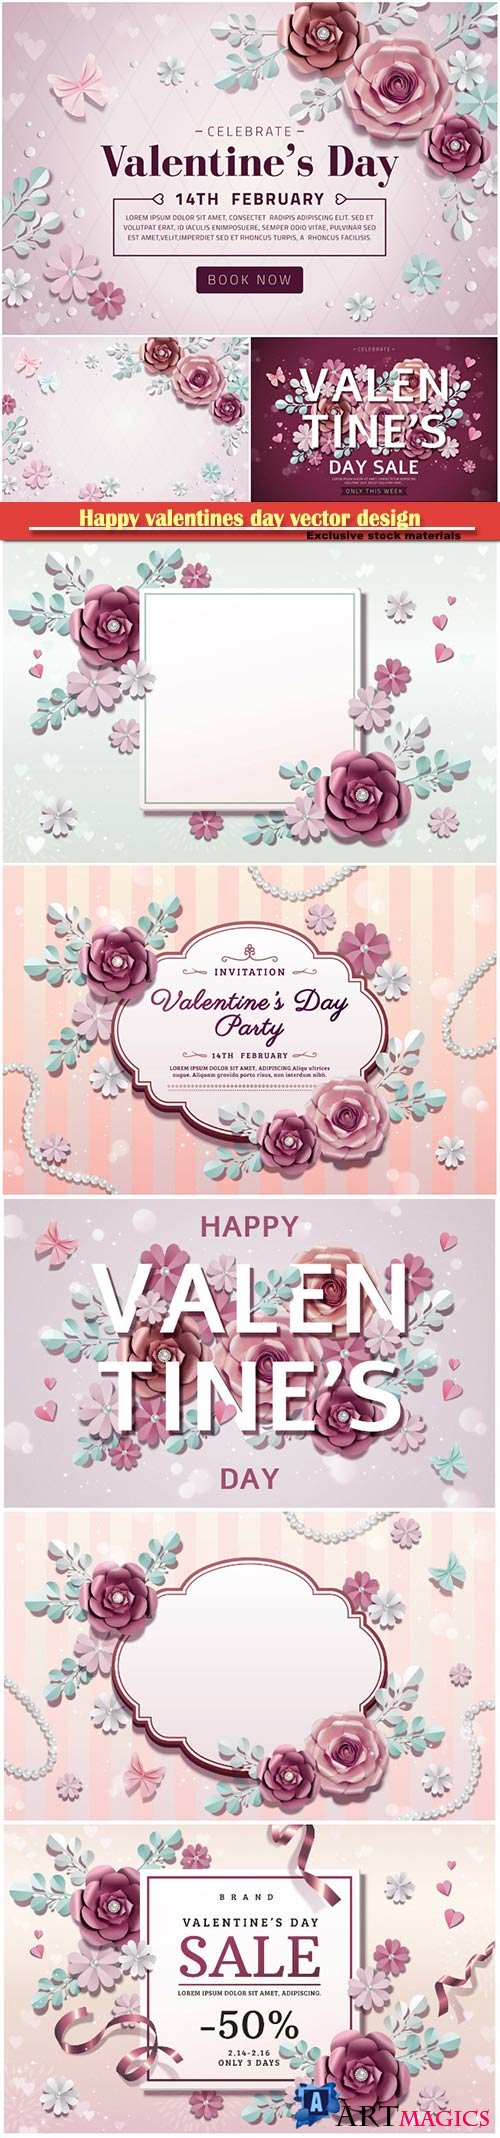 Happy valentines day vector design with heart, balloons, roses in 3d illustration # 6